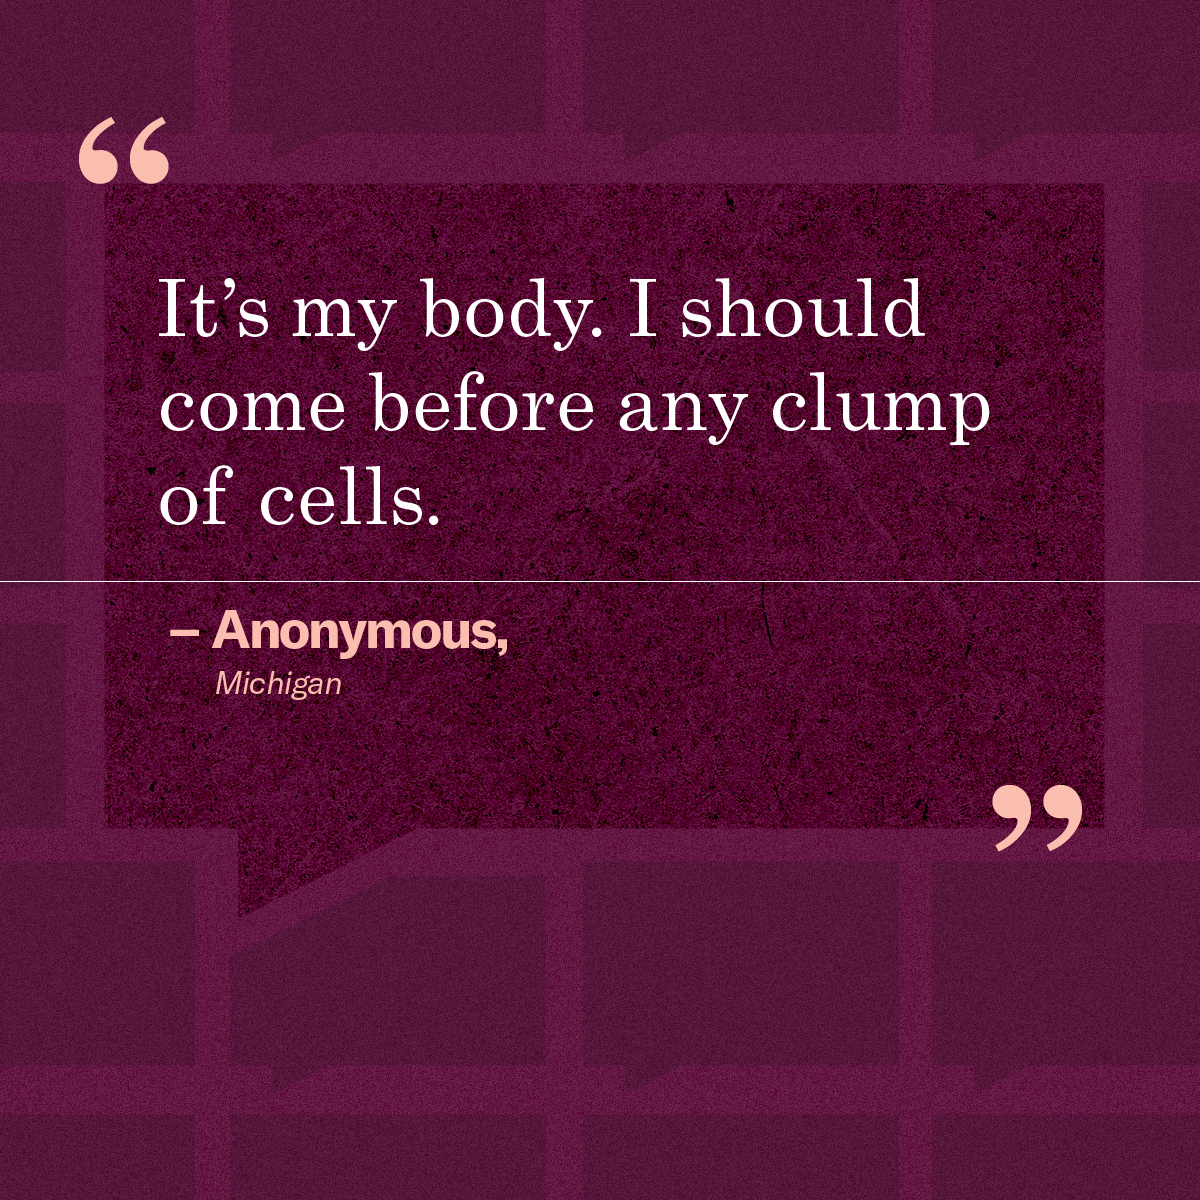 “It’s my body. I should come before any clump of cells.” – Anonymous, Michigan